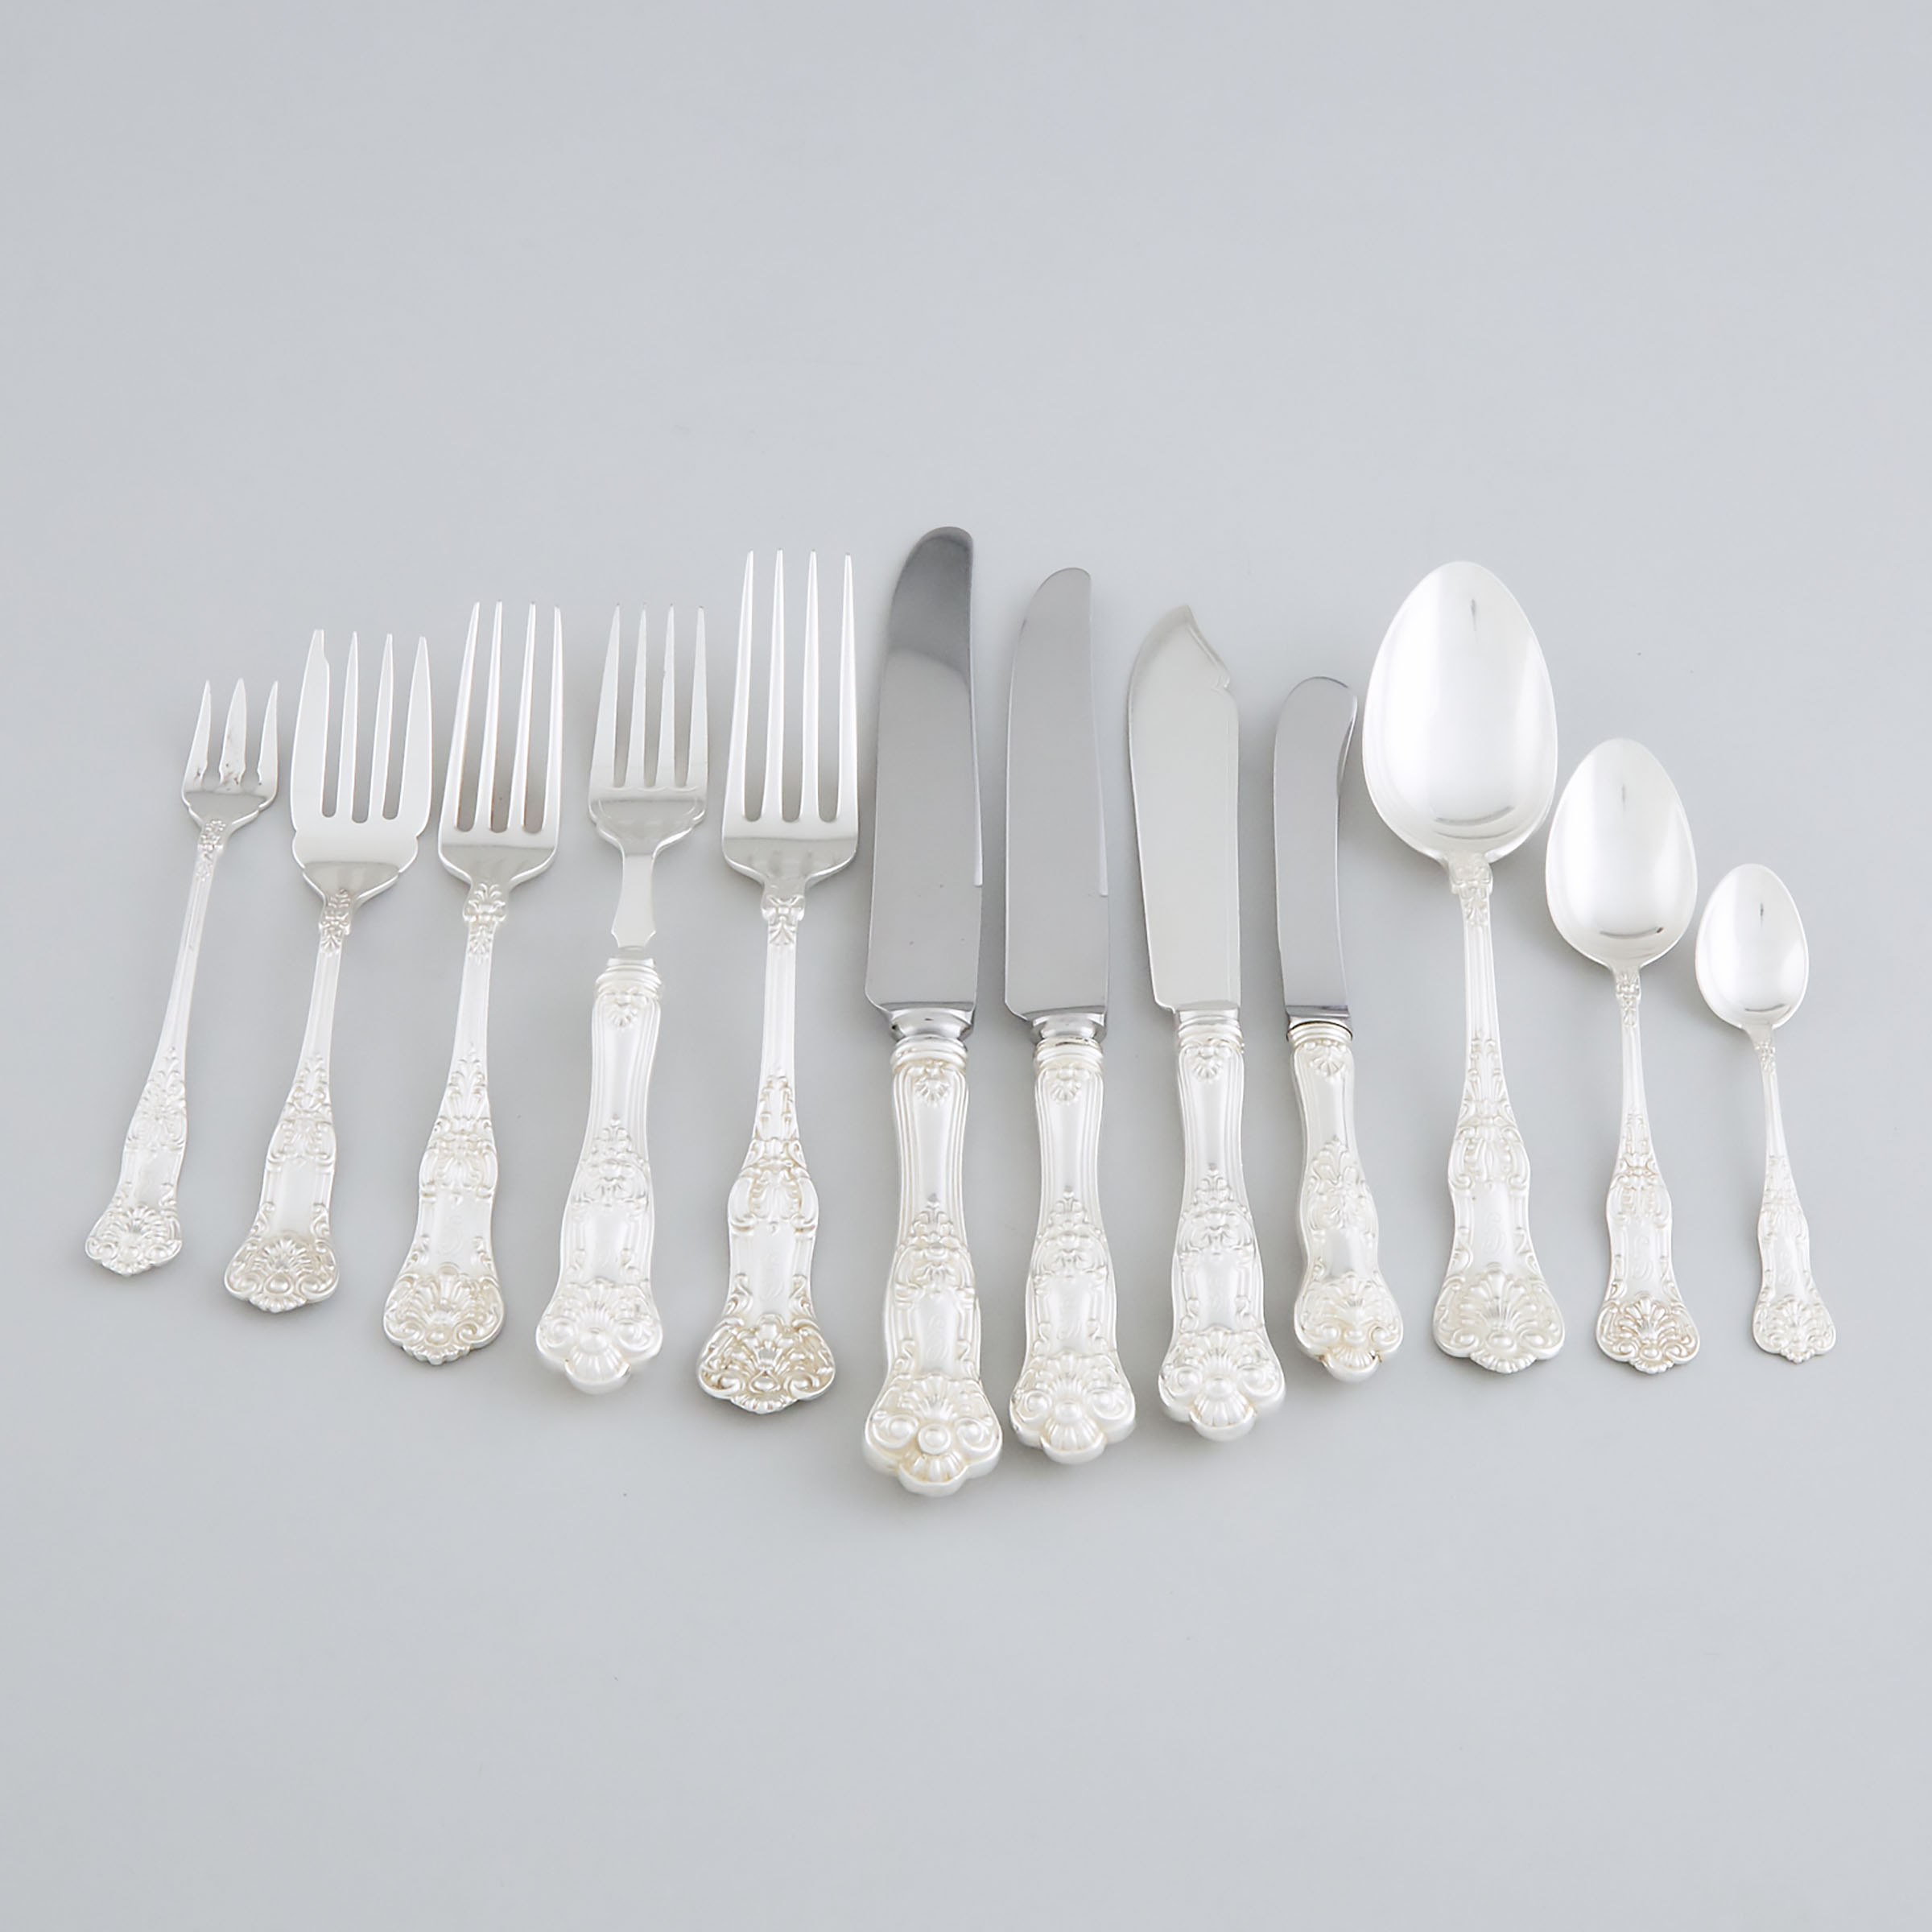 Canadian Silver ‘Queens’ Pattern Flatware Service, Roden Brothers, Toronto, Ont. and Henry Birks & Sons, Montreal, Que., 20th century